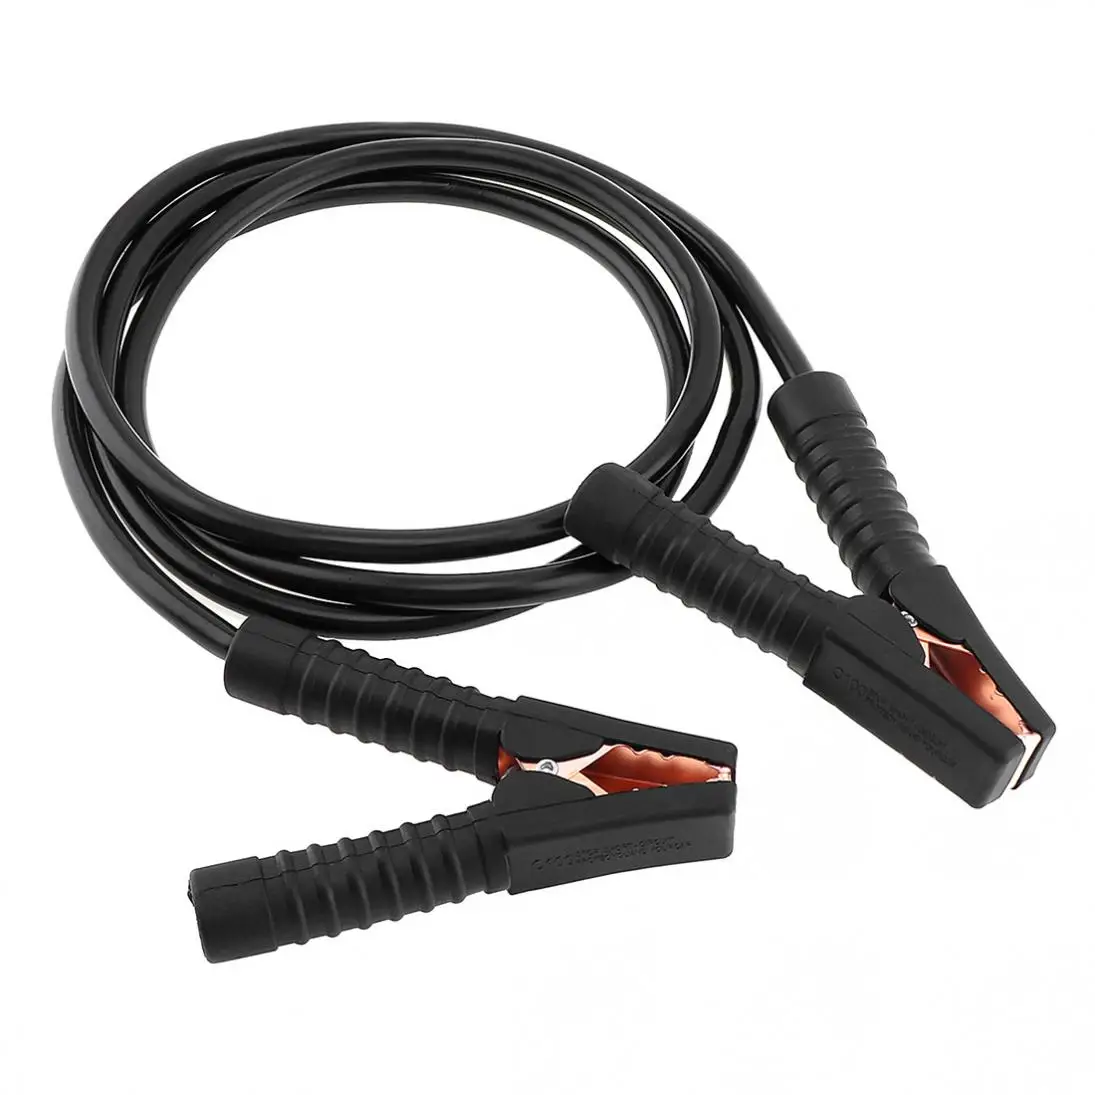 

2.5M 500A 10MM Copper Clad Aluminum Cars Emergency Ignition Jump Starter Leads Wire Battery Booster Cable